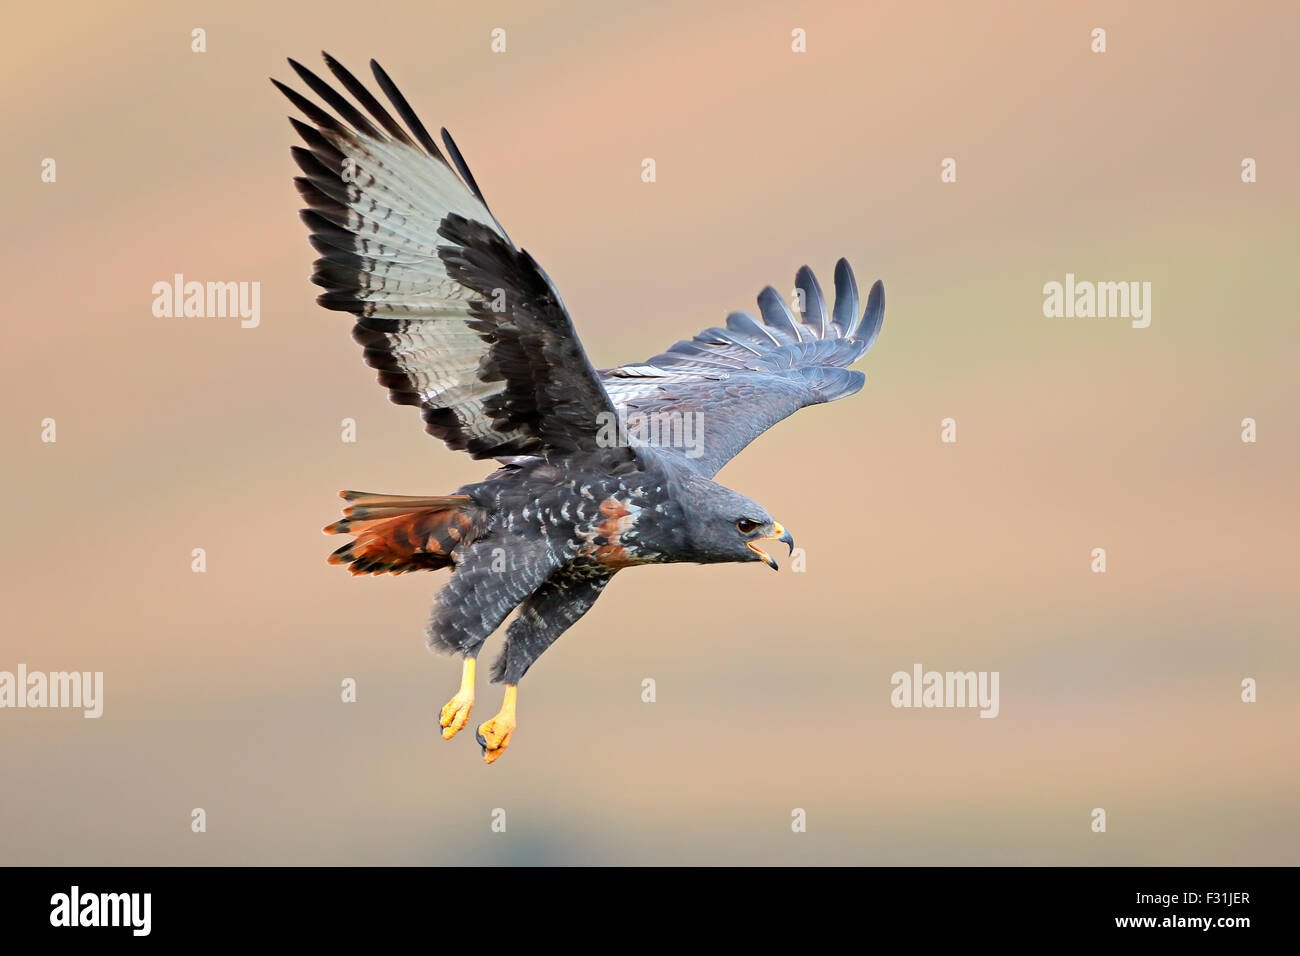 Jackal buzzard (Buteo rufofuscus) in flight with outstretched wings, South Africa Stock Photo